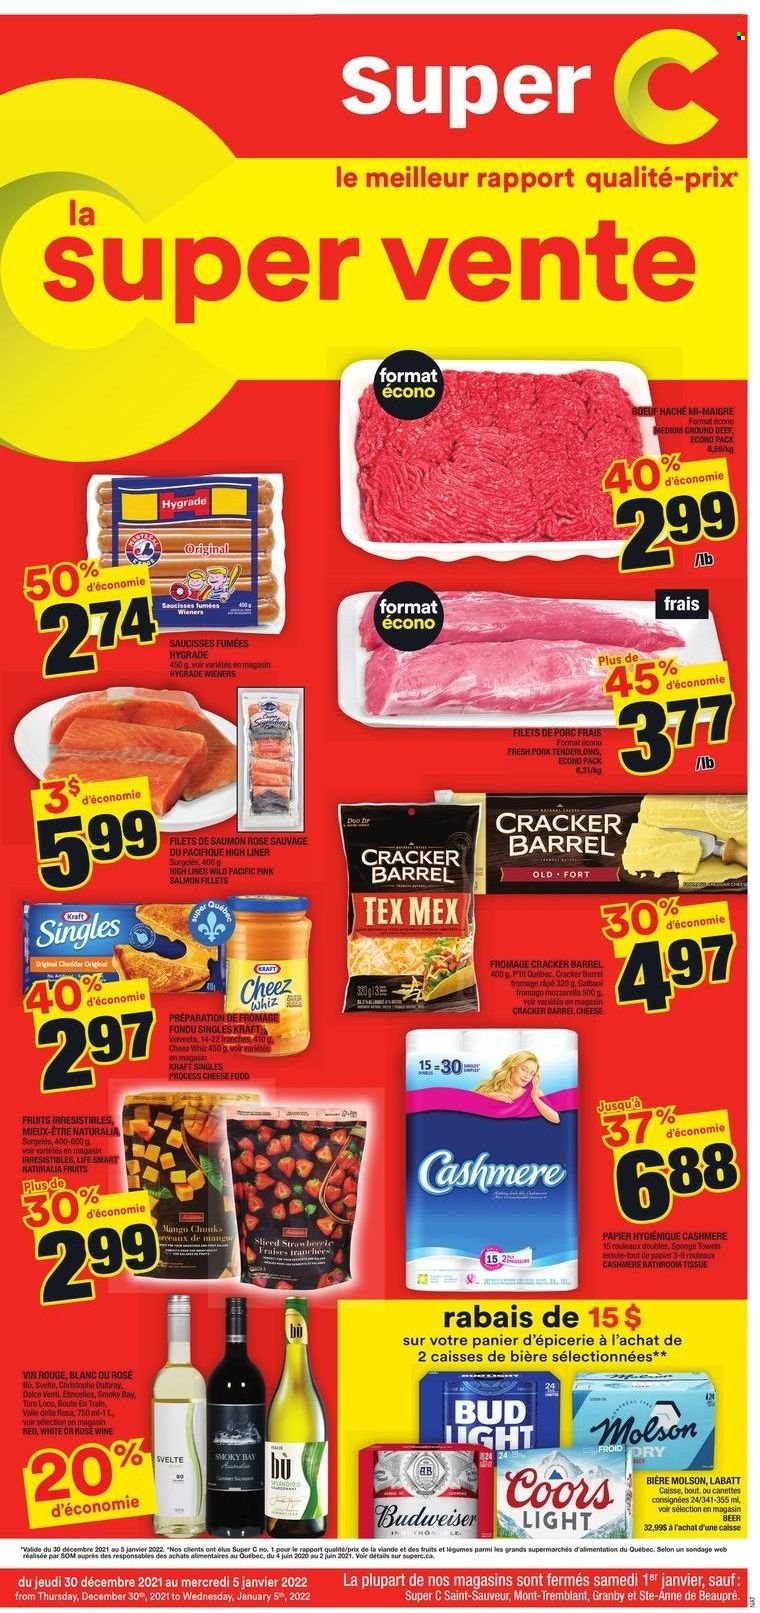 Super C Flyer - December 30, 2021 - January 05, 2022 - Sales products - salmon, salmon fillet, Kraft®, sandwich slices, cheddar, cheese, Kraft Singles, crackers, wine, rosé wine, beer, beef meat, ground beef, bath tissue, Budweiser, Coors. Page 1.